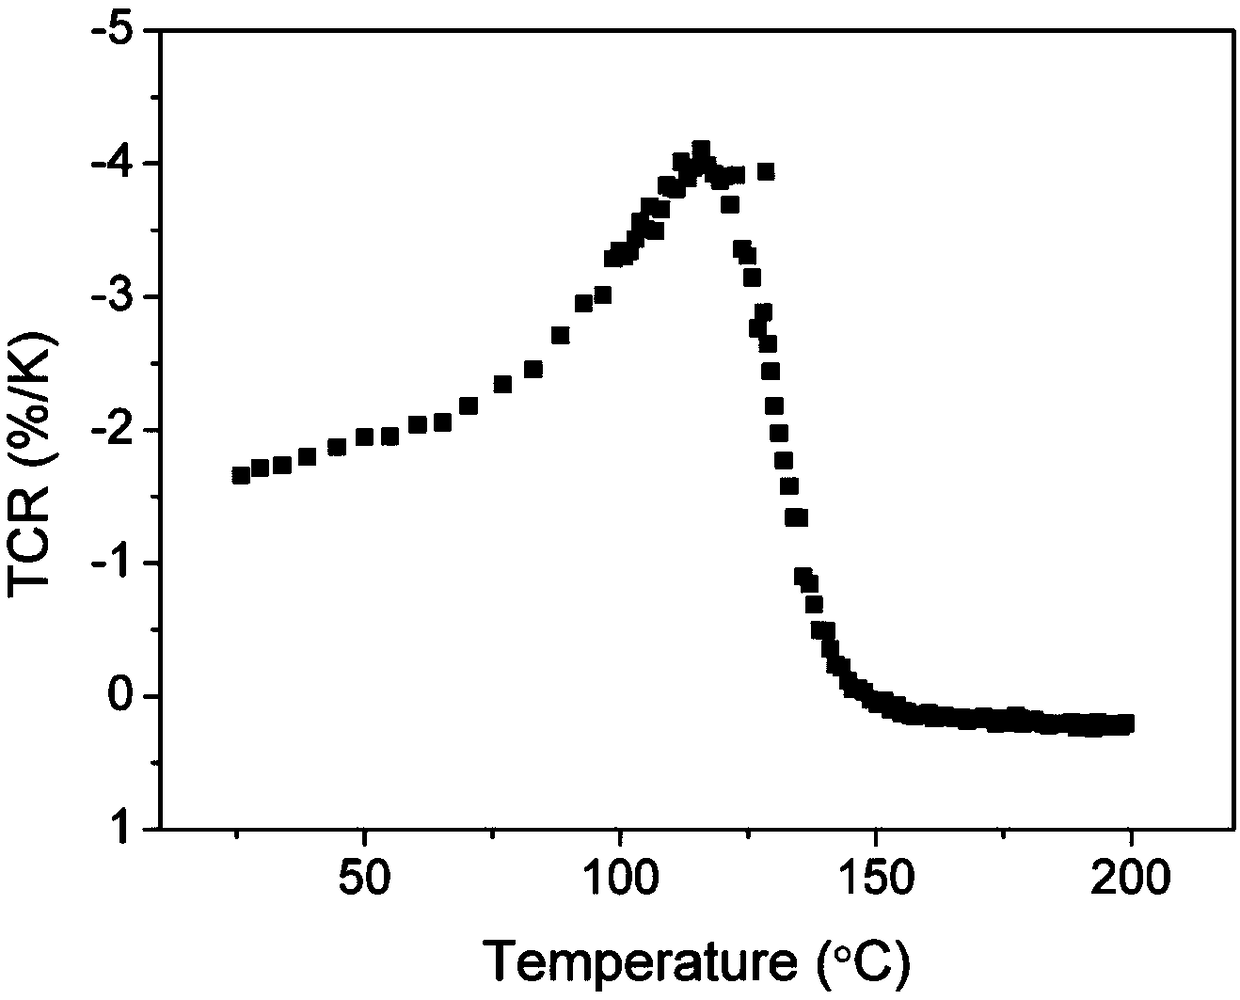 Rare earth nickel-based perovskite oxide thermistor material for infrared detection